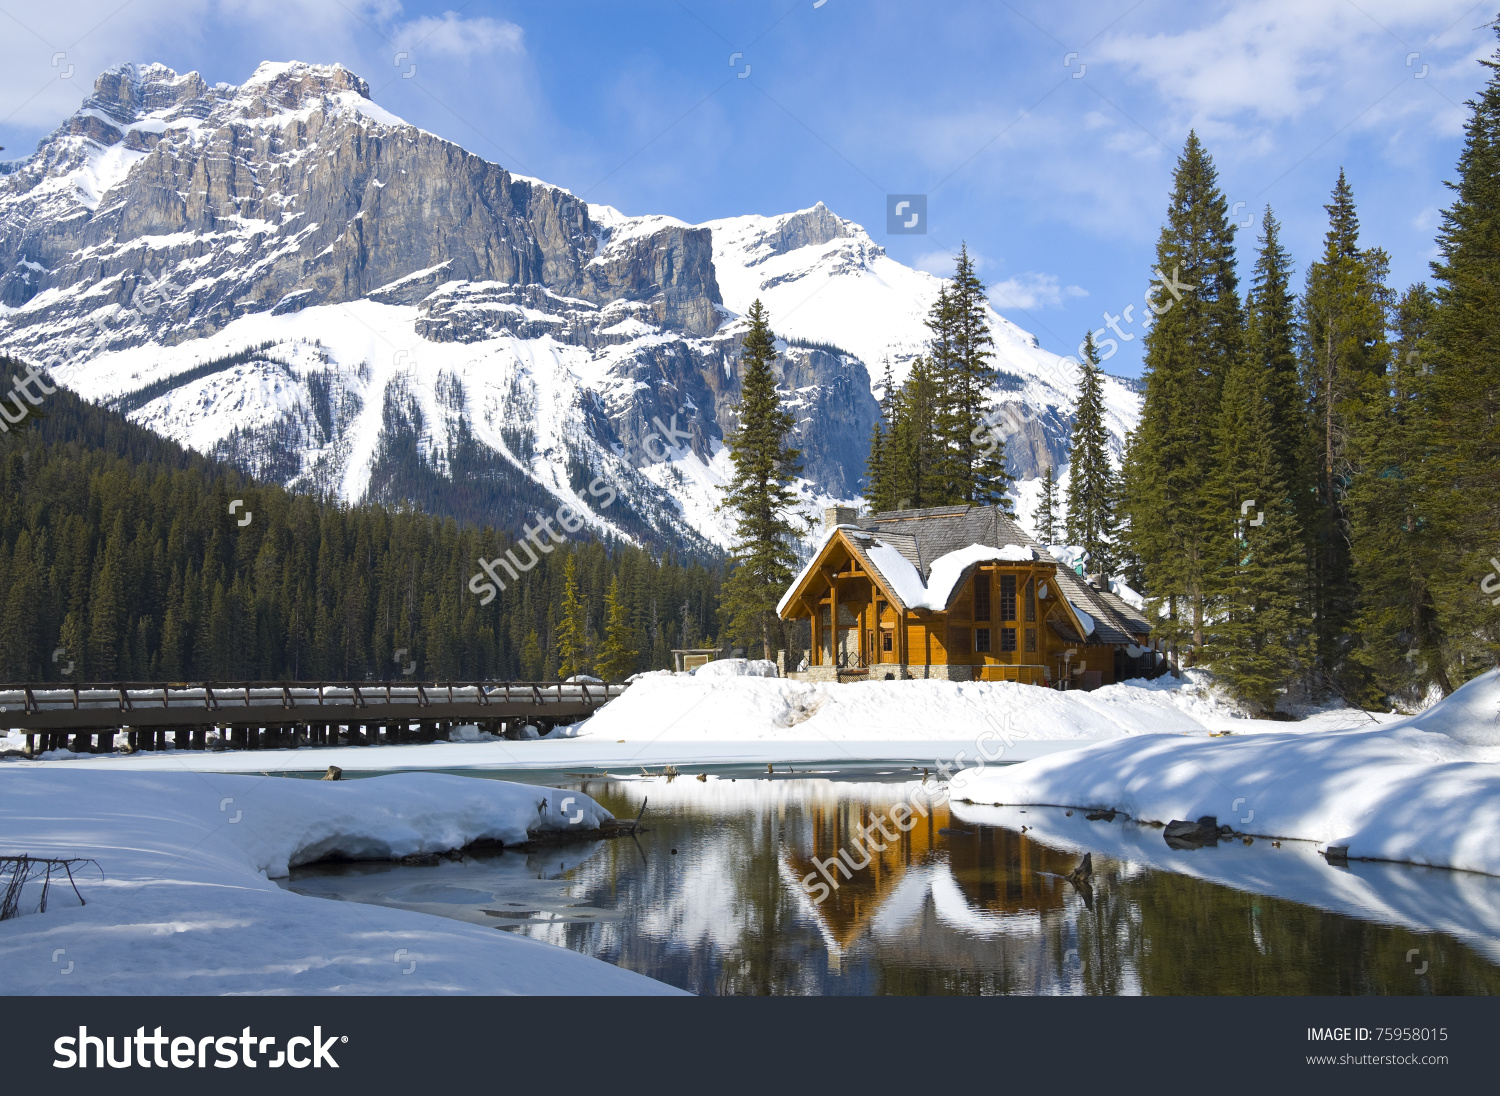 Yoho National Park clipart #10, Download drawings